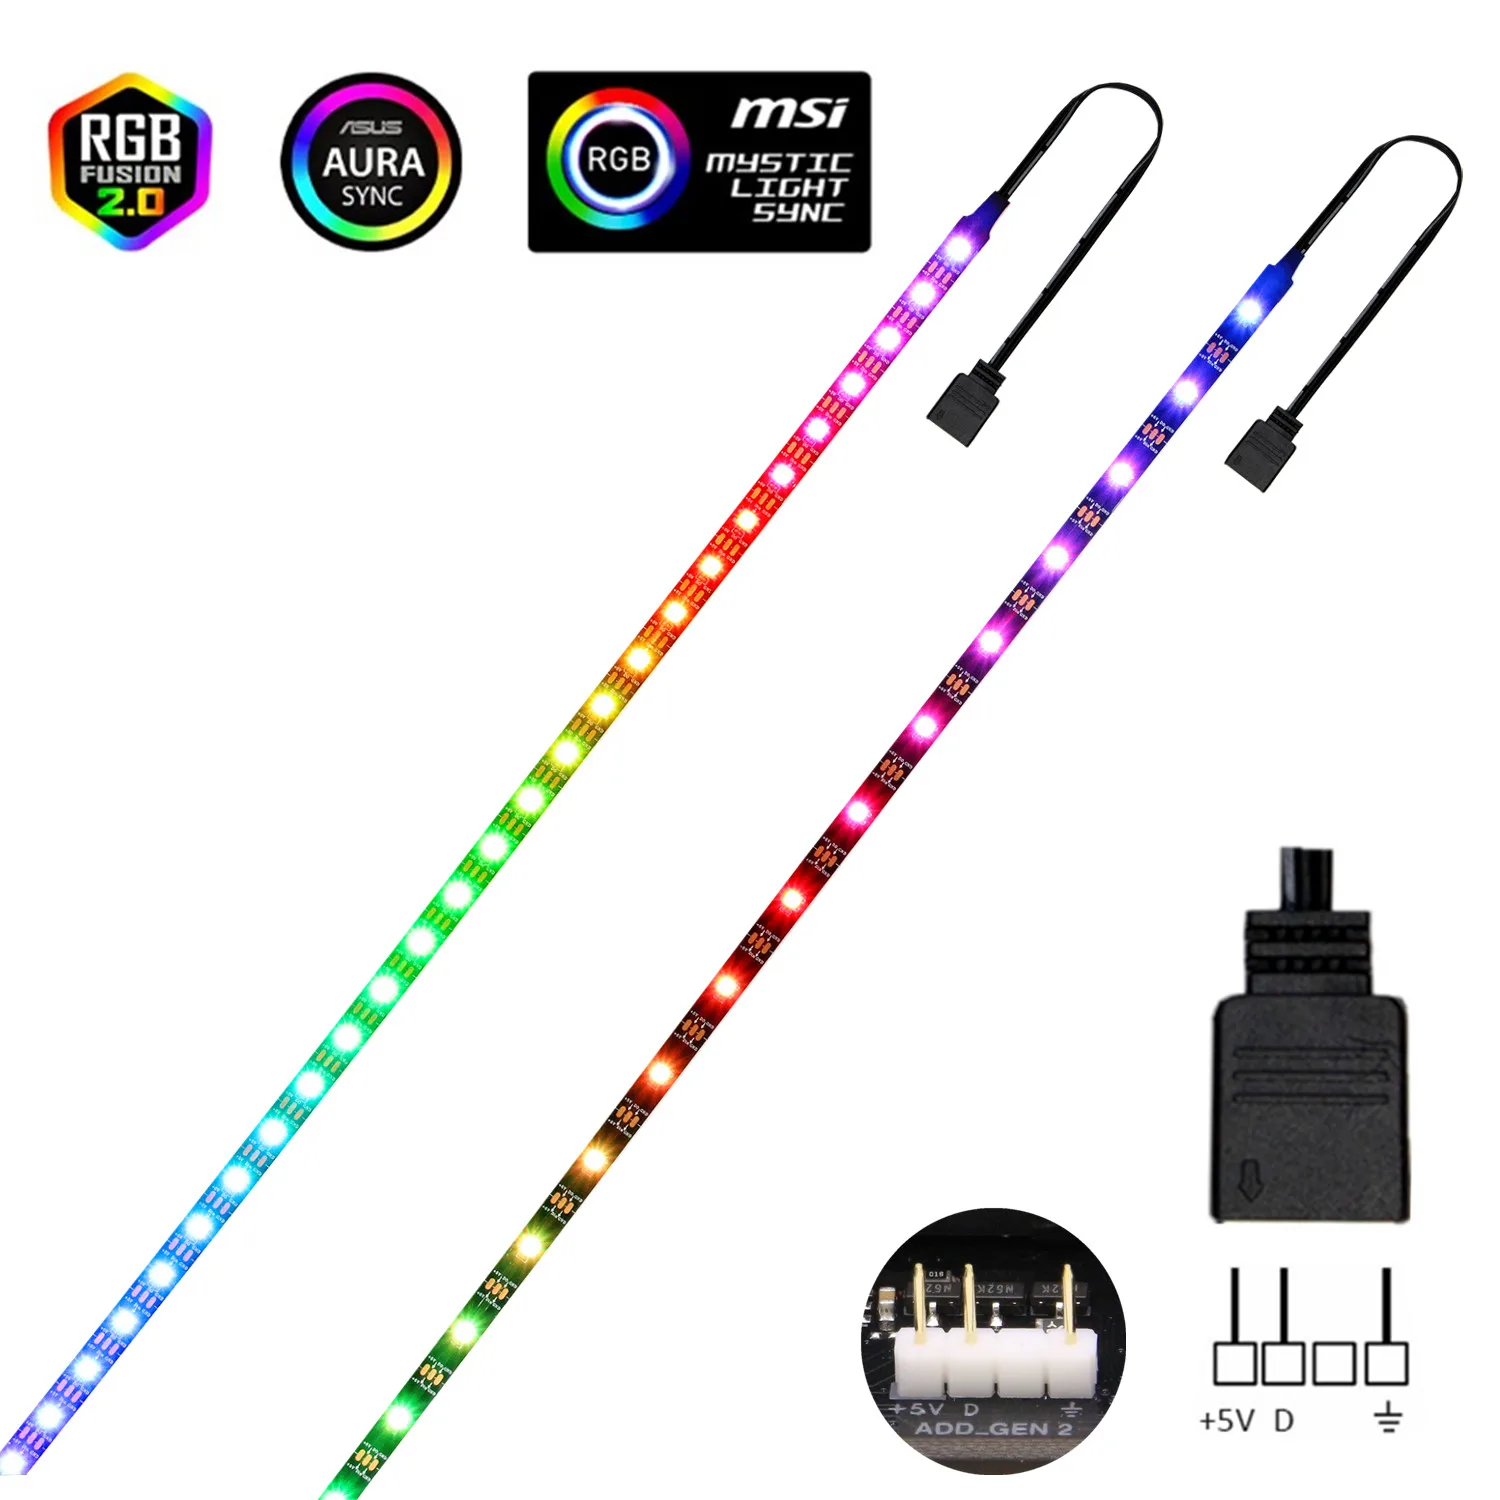 

Addressable WS2812b RGB LED Strip for PC, for ASUS Aura SYNC,MSI Mystic Light,GIGABYTE Fusion2.0 5V 3Pin Header on Motherboard